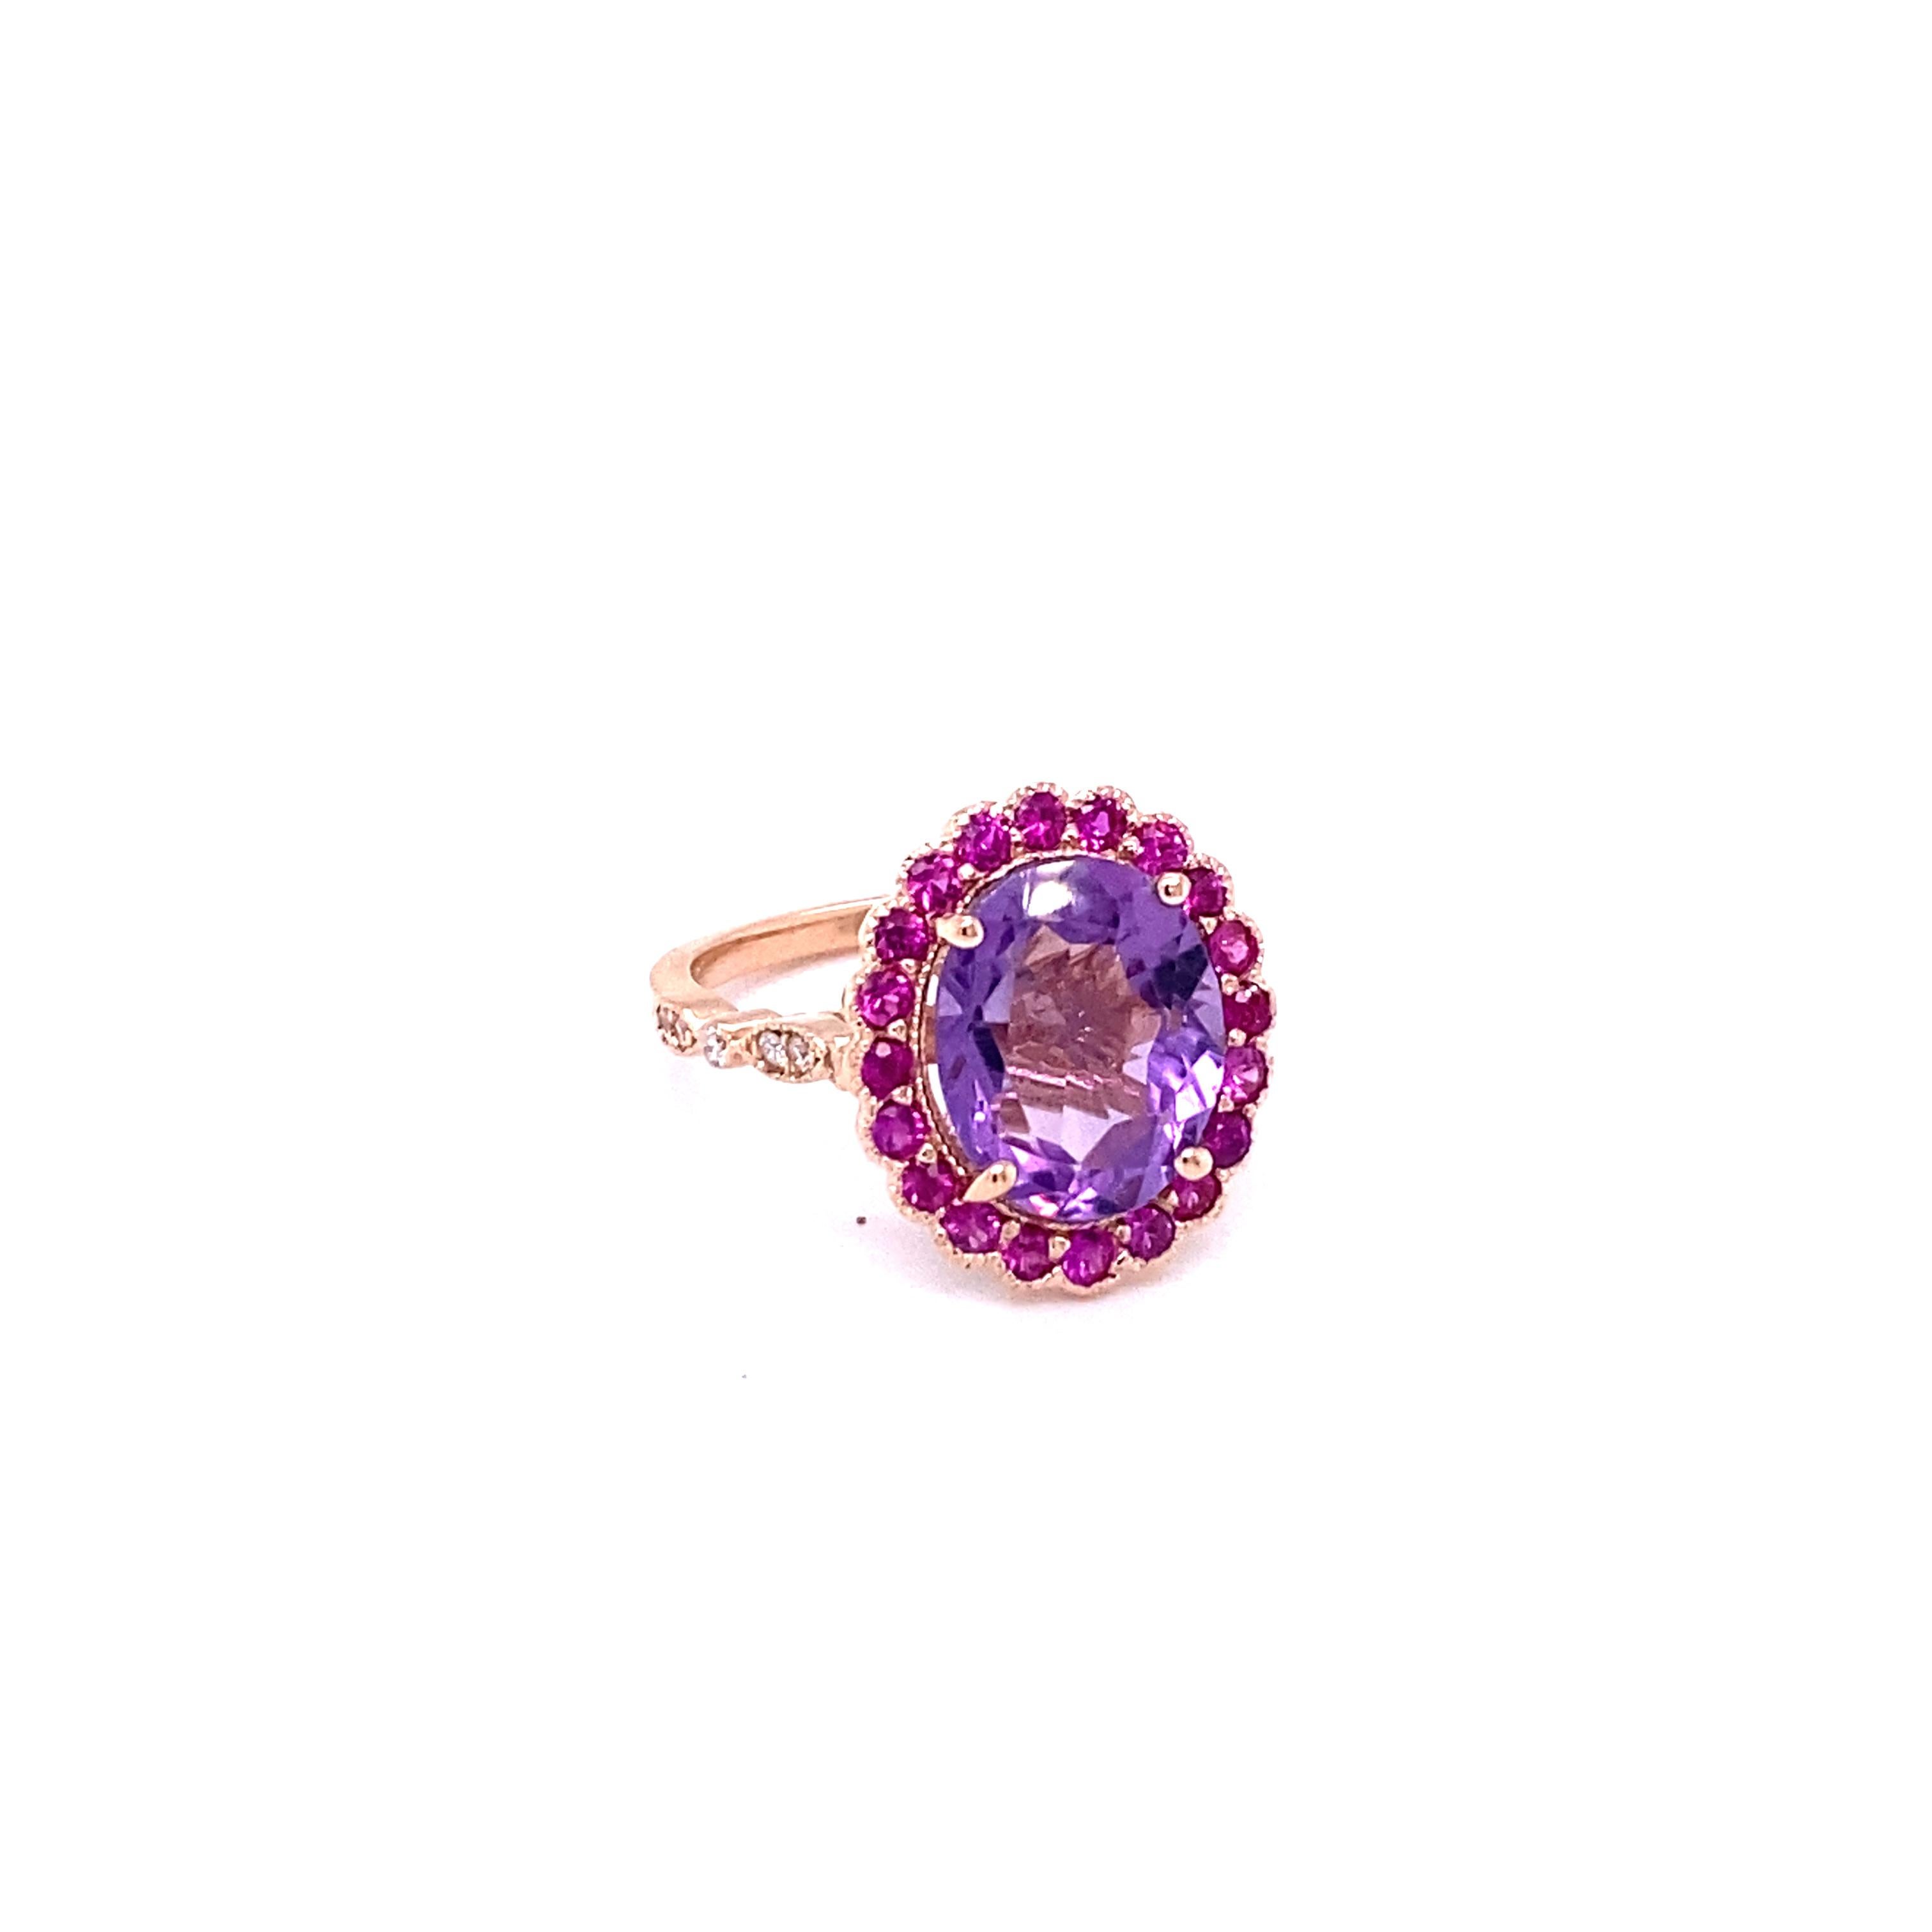 3.79 Carat Natural Amethyst Pink Sapphire Diamond Rose Gold Engagement Ring

Playful yet Powerful! Its like having a piece of glittery candy on your finger! This ring has a bright Oval Cut Amethyst that weighs 3.10 Carats and is embellished with a